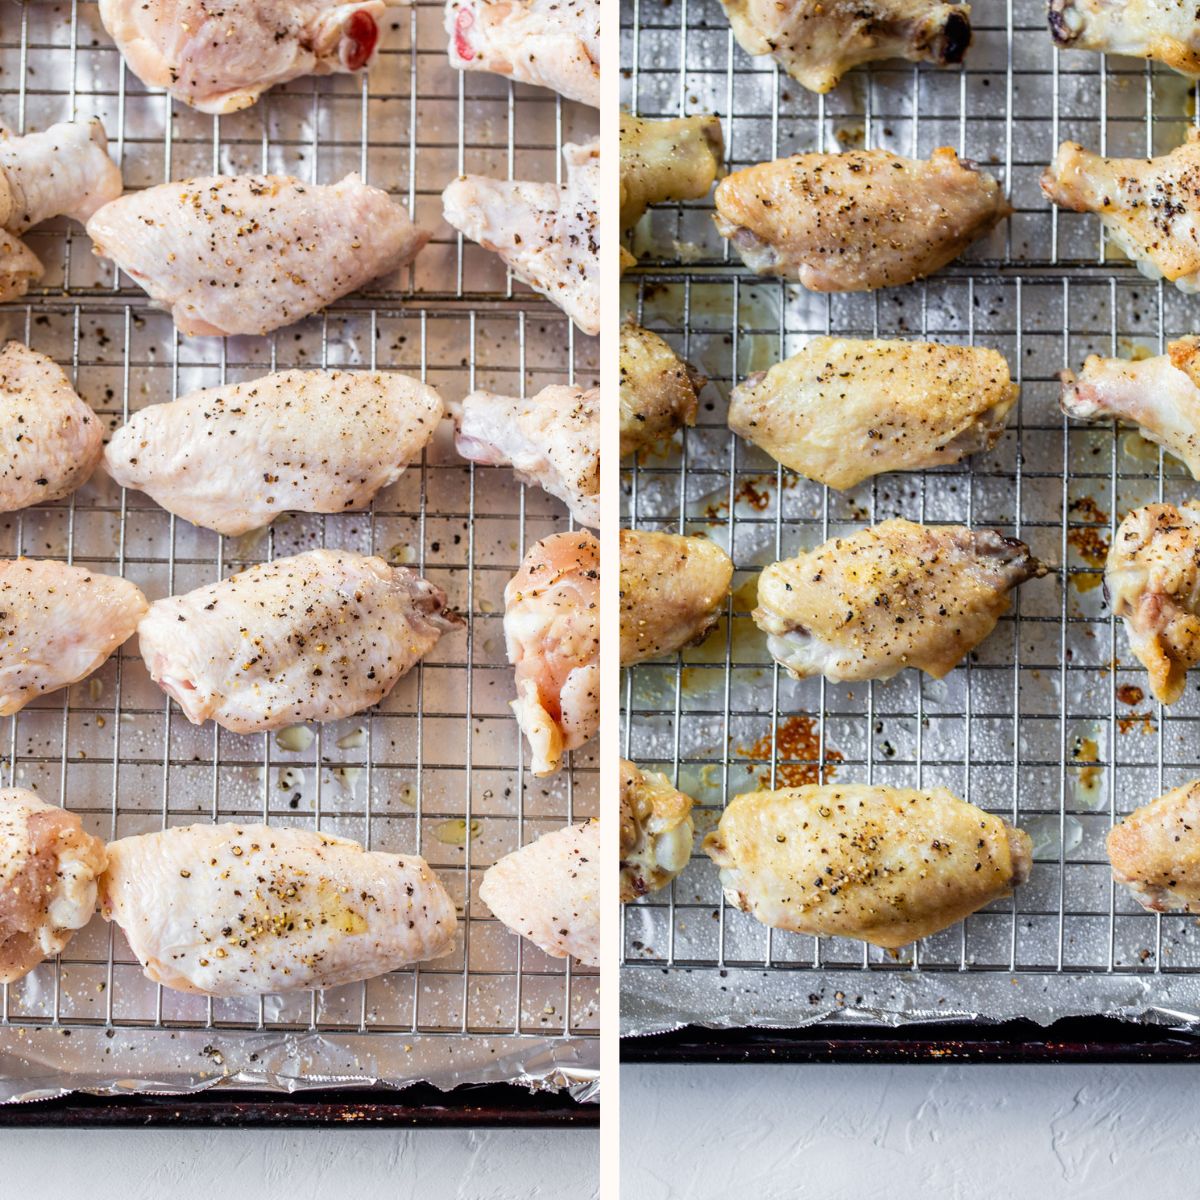 raw chicken wings on a baking sheet on the left and baked on the right